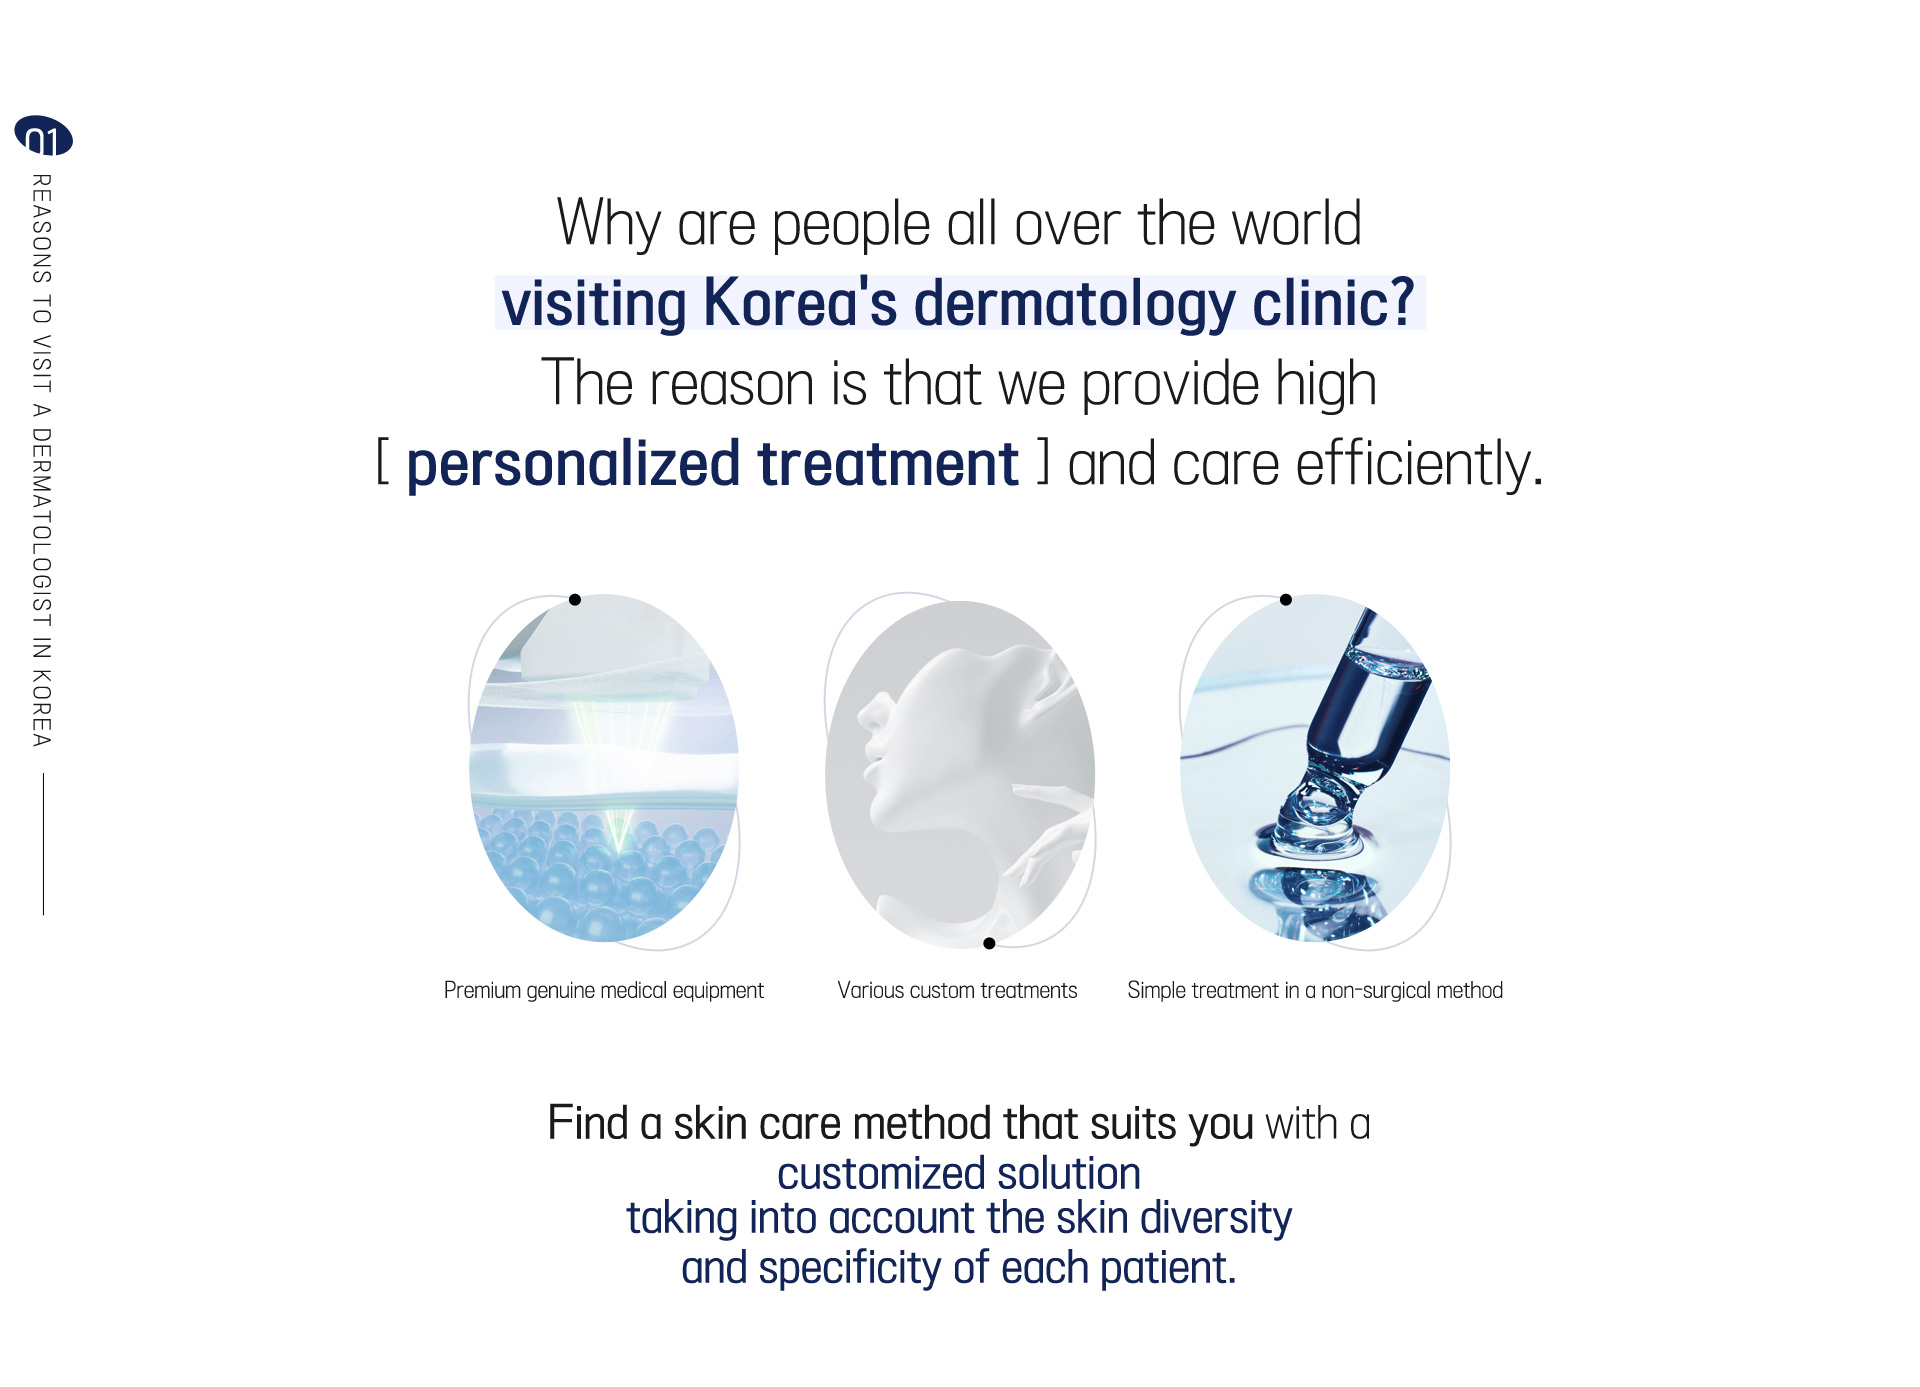 Reasons to visit a dermatologist in korea